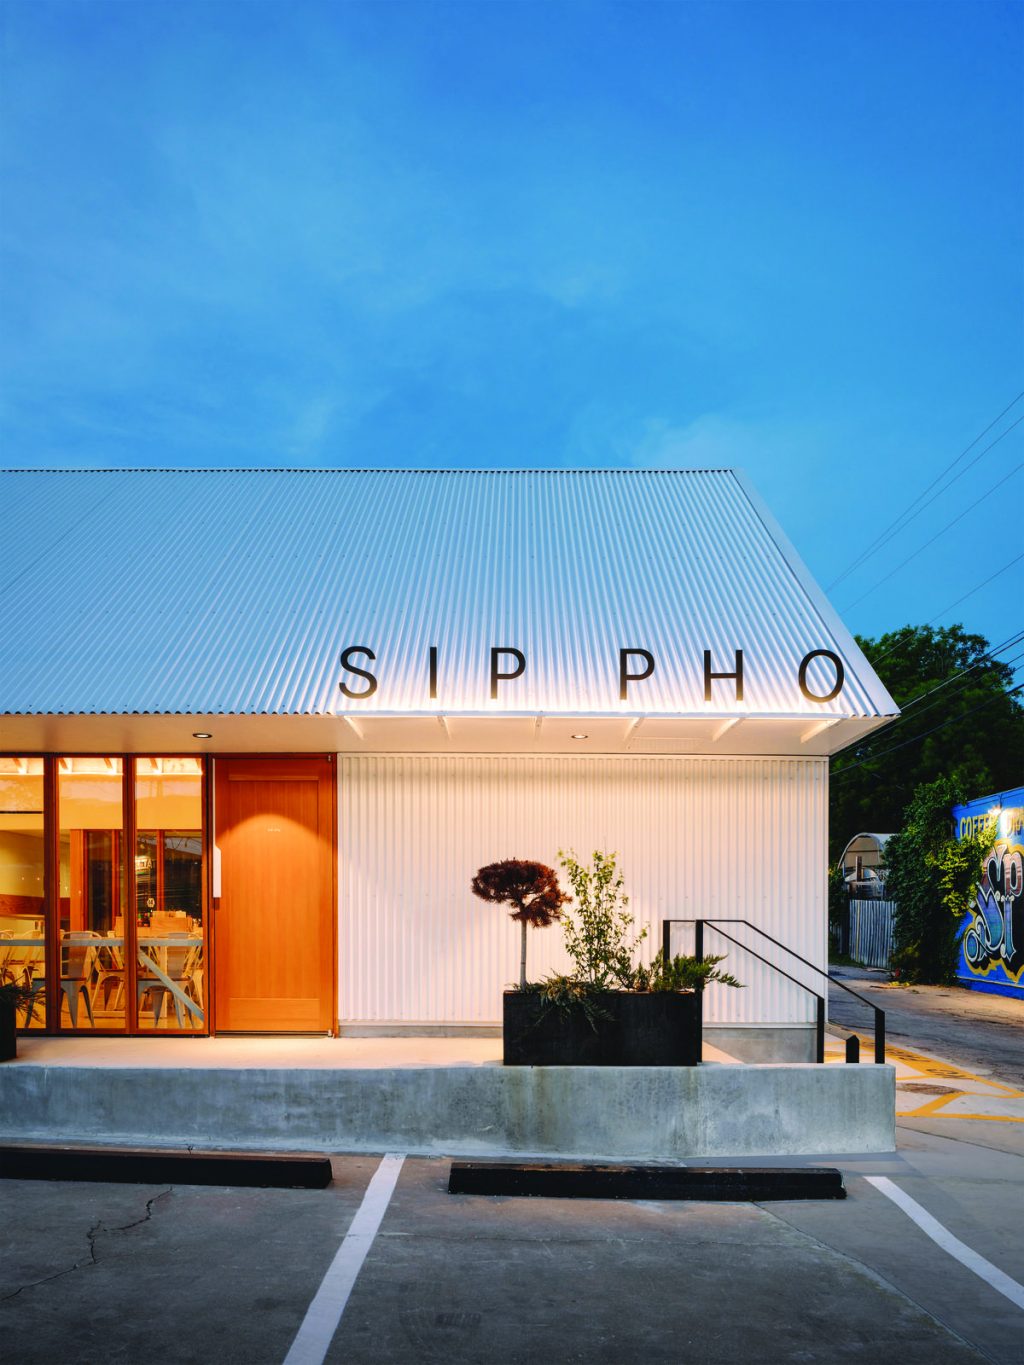 Sip Pho Restaurant by MAGIC architecture